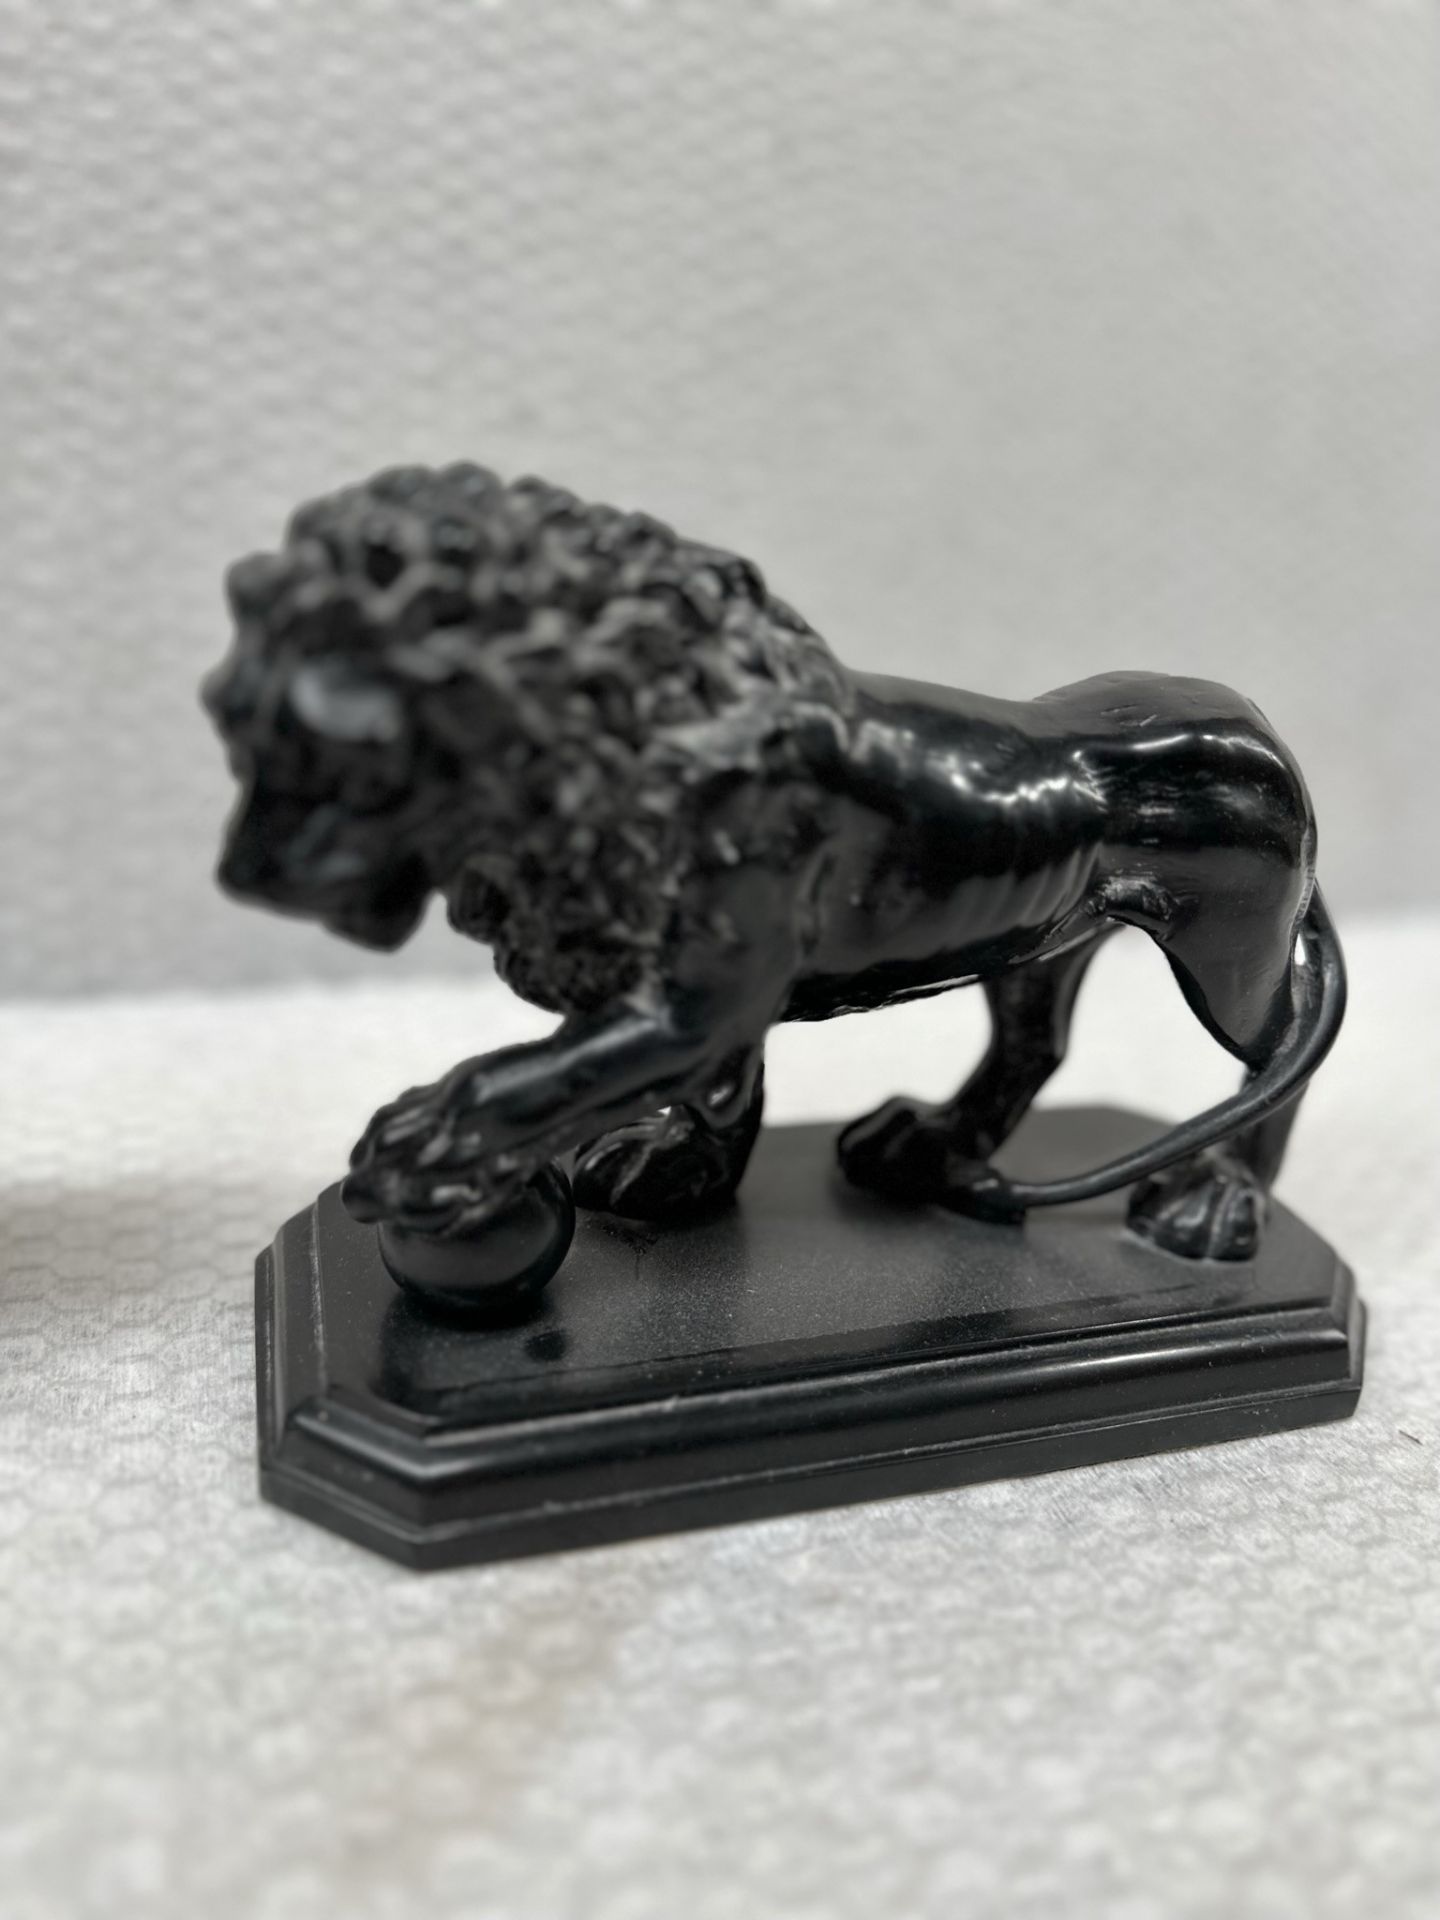 2 x Black Sleeping Lions Resin Bookends - Image 2 of 3